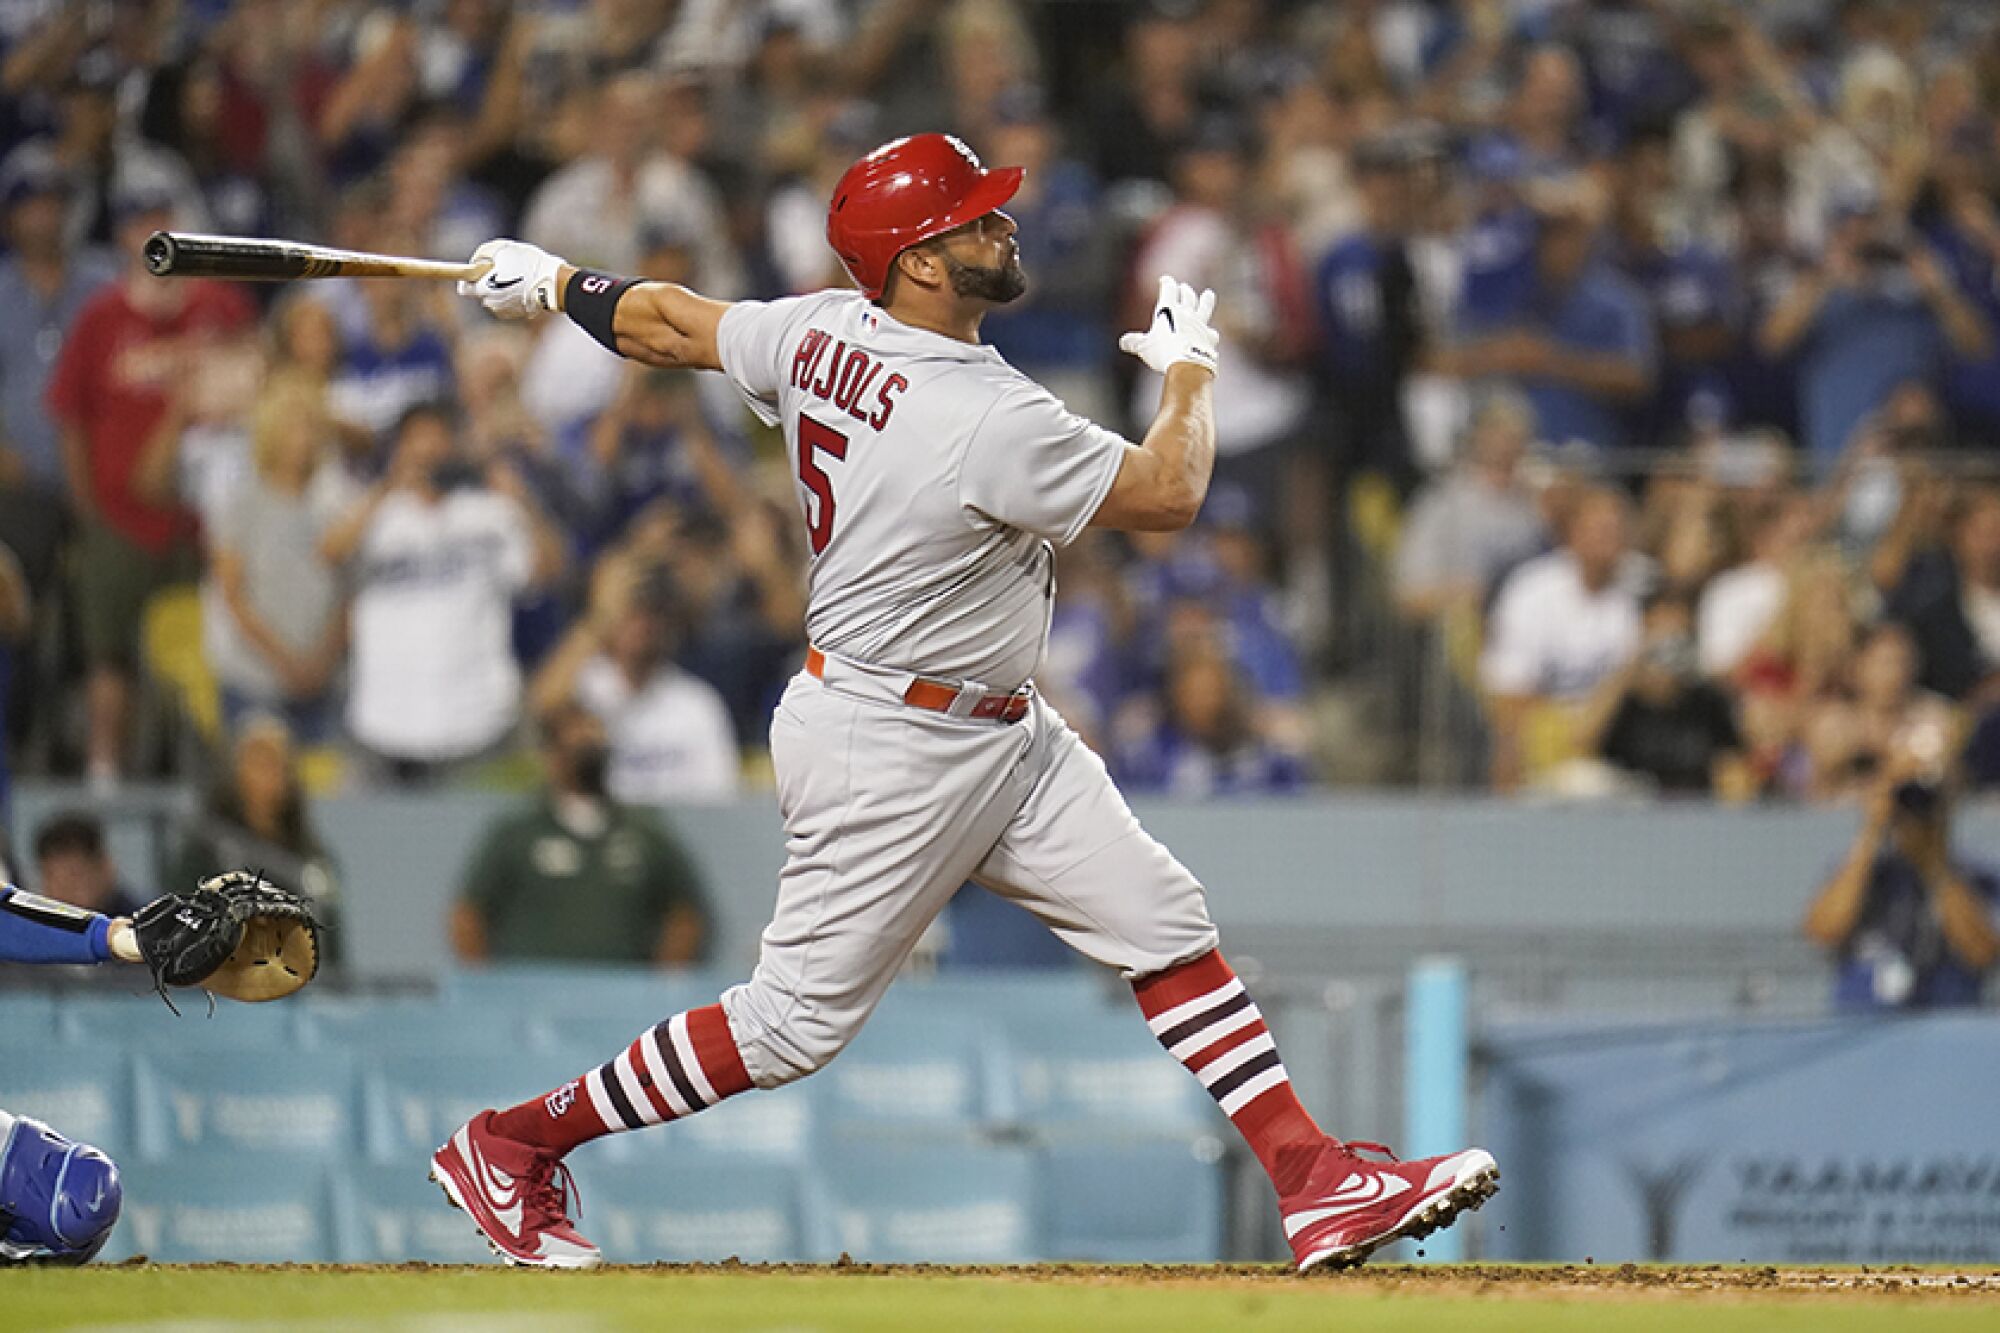 Albert Pujols hit his 700th career homer in the fourth inning Friday.